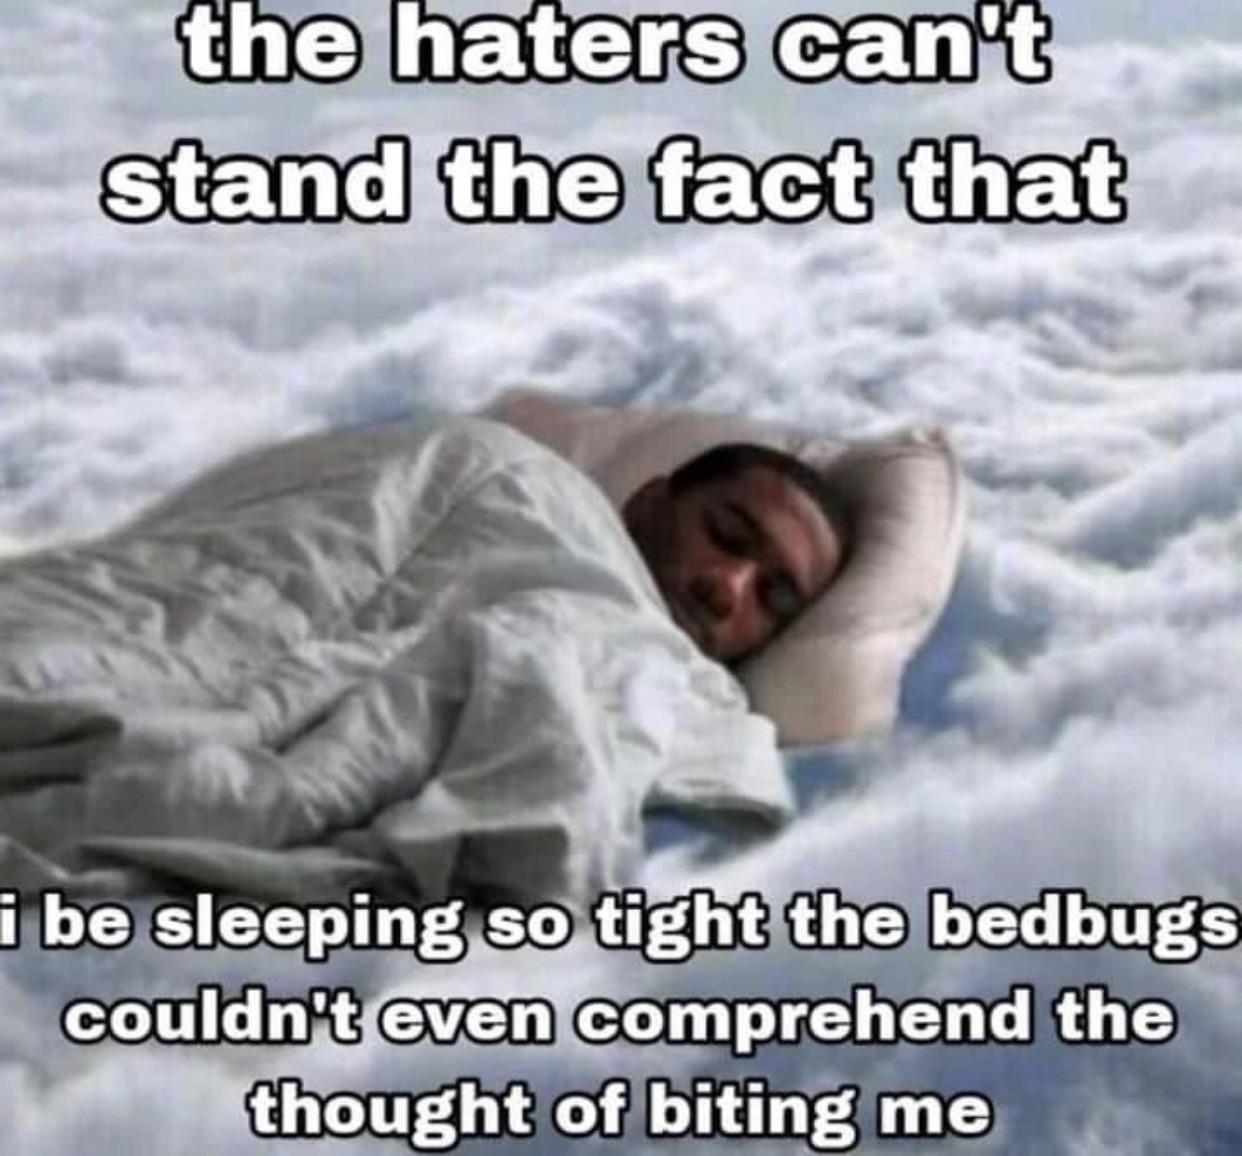 funny memes and pics - after church nap meme - the haters can't stand the fact that i be sleeping so tight the bedbugs couldn't even comprehend the thought of biting me